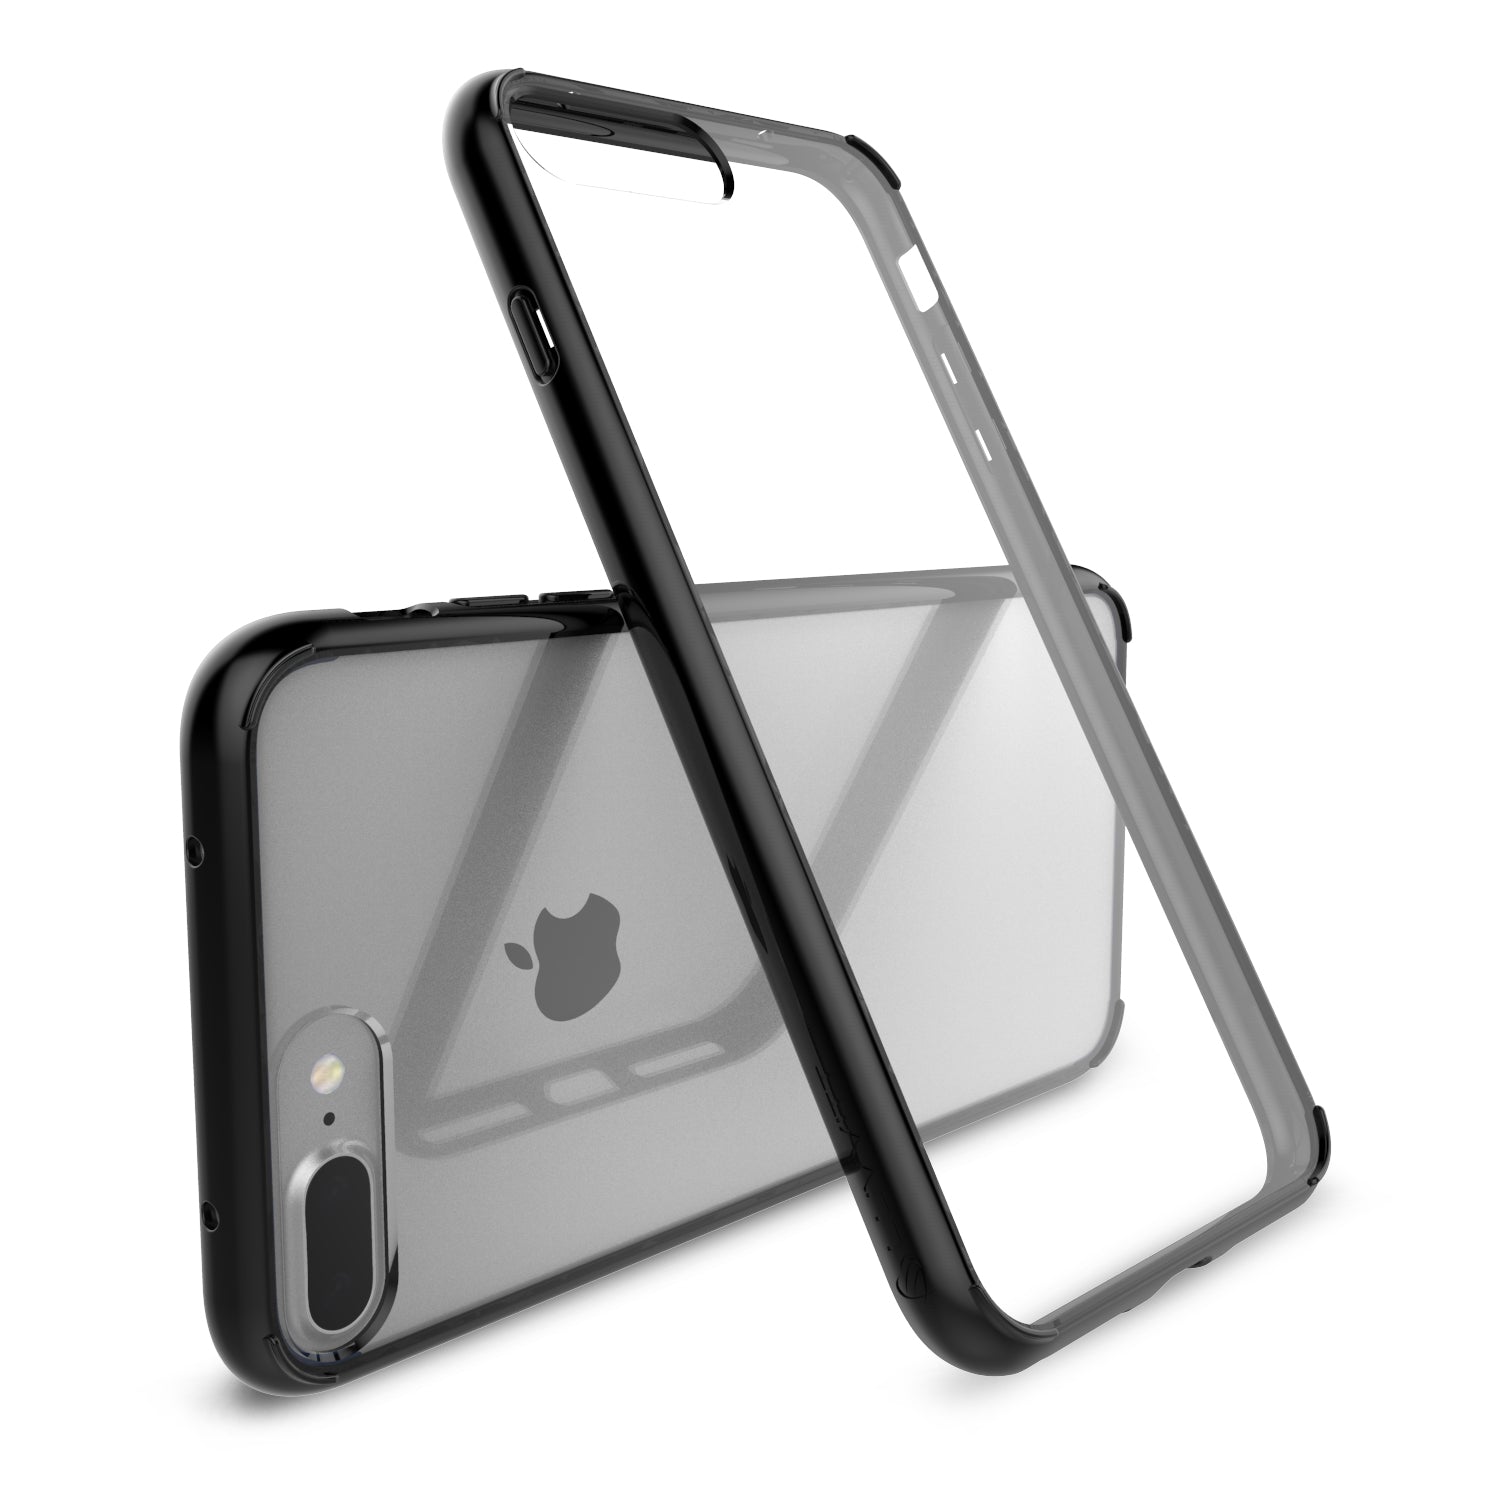 Luvvitt Crystal View Hybrid Case for iPhone 7 Plus and 8 Plus - Crystal Black